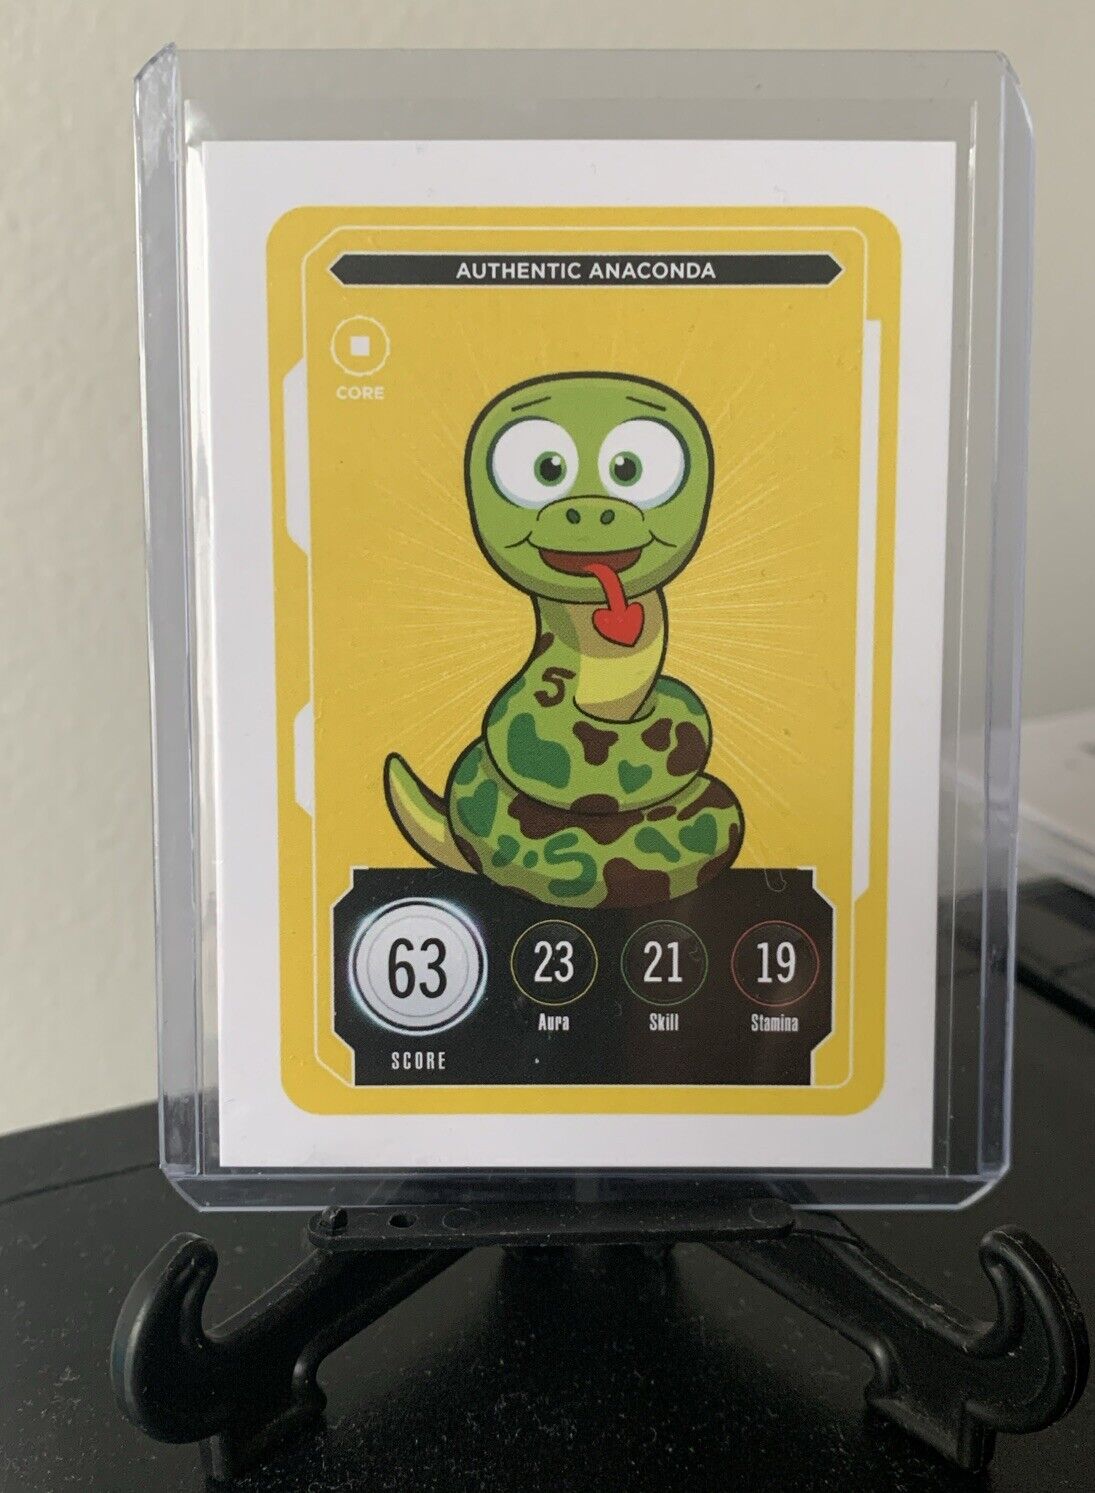 Authentic Anaconda VeeFriends Series 2 Compete and Collect Core Card Gary Vee